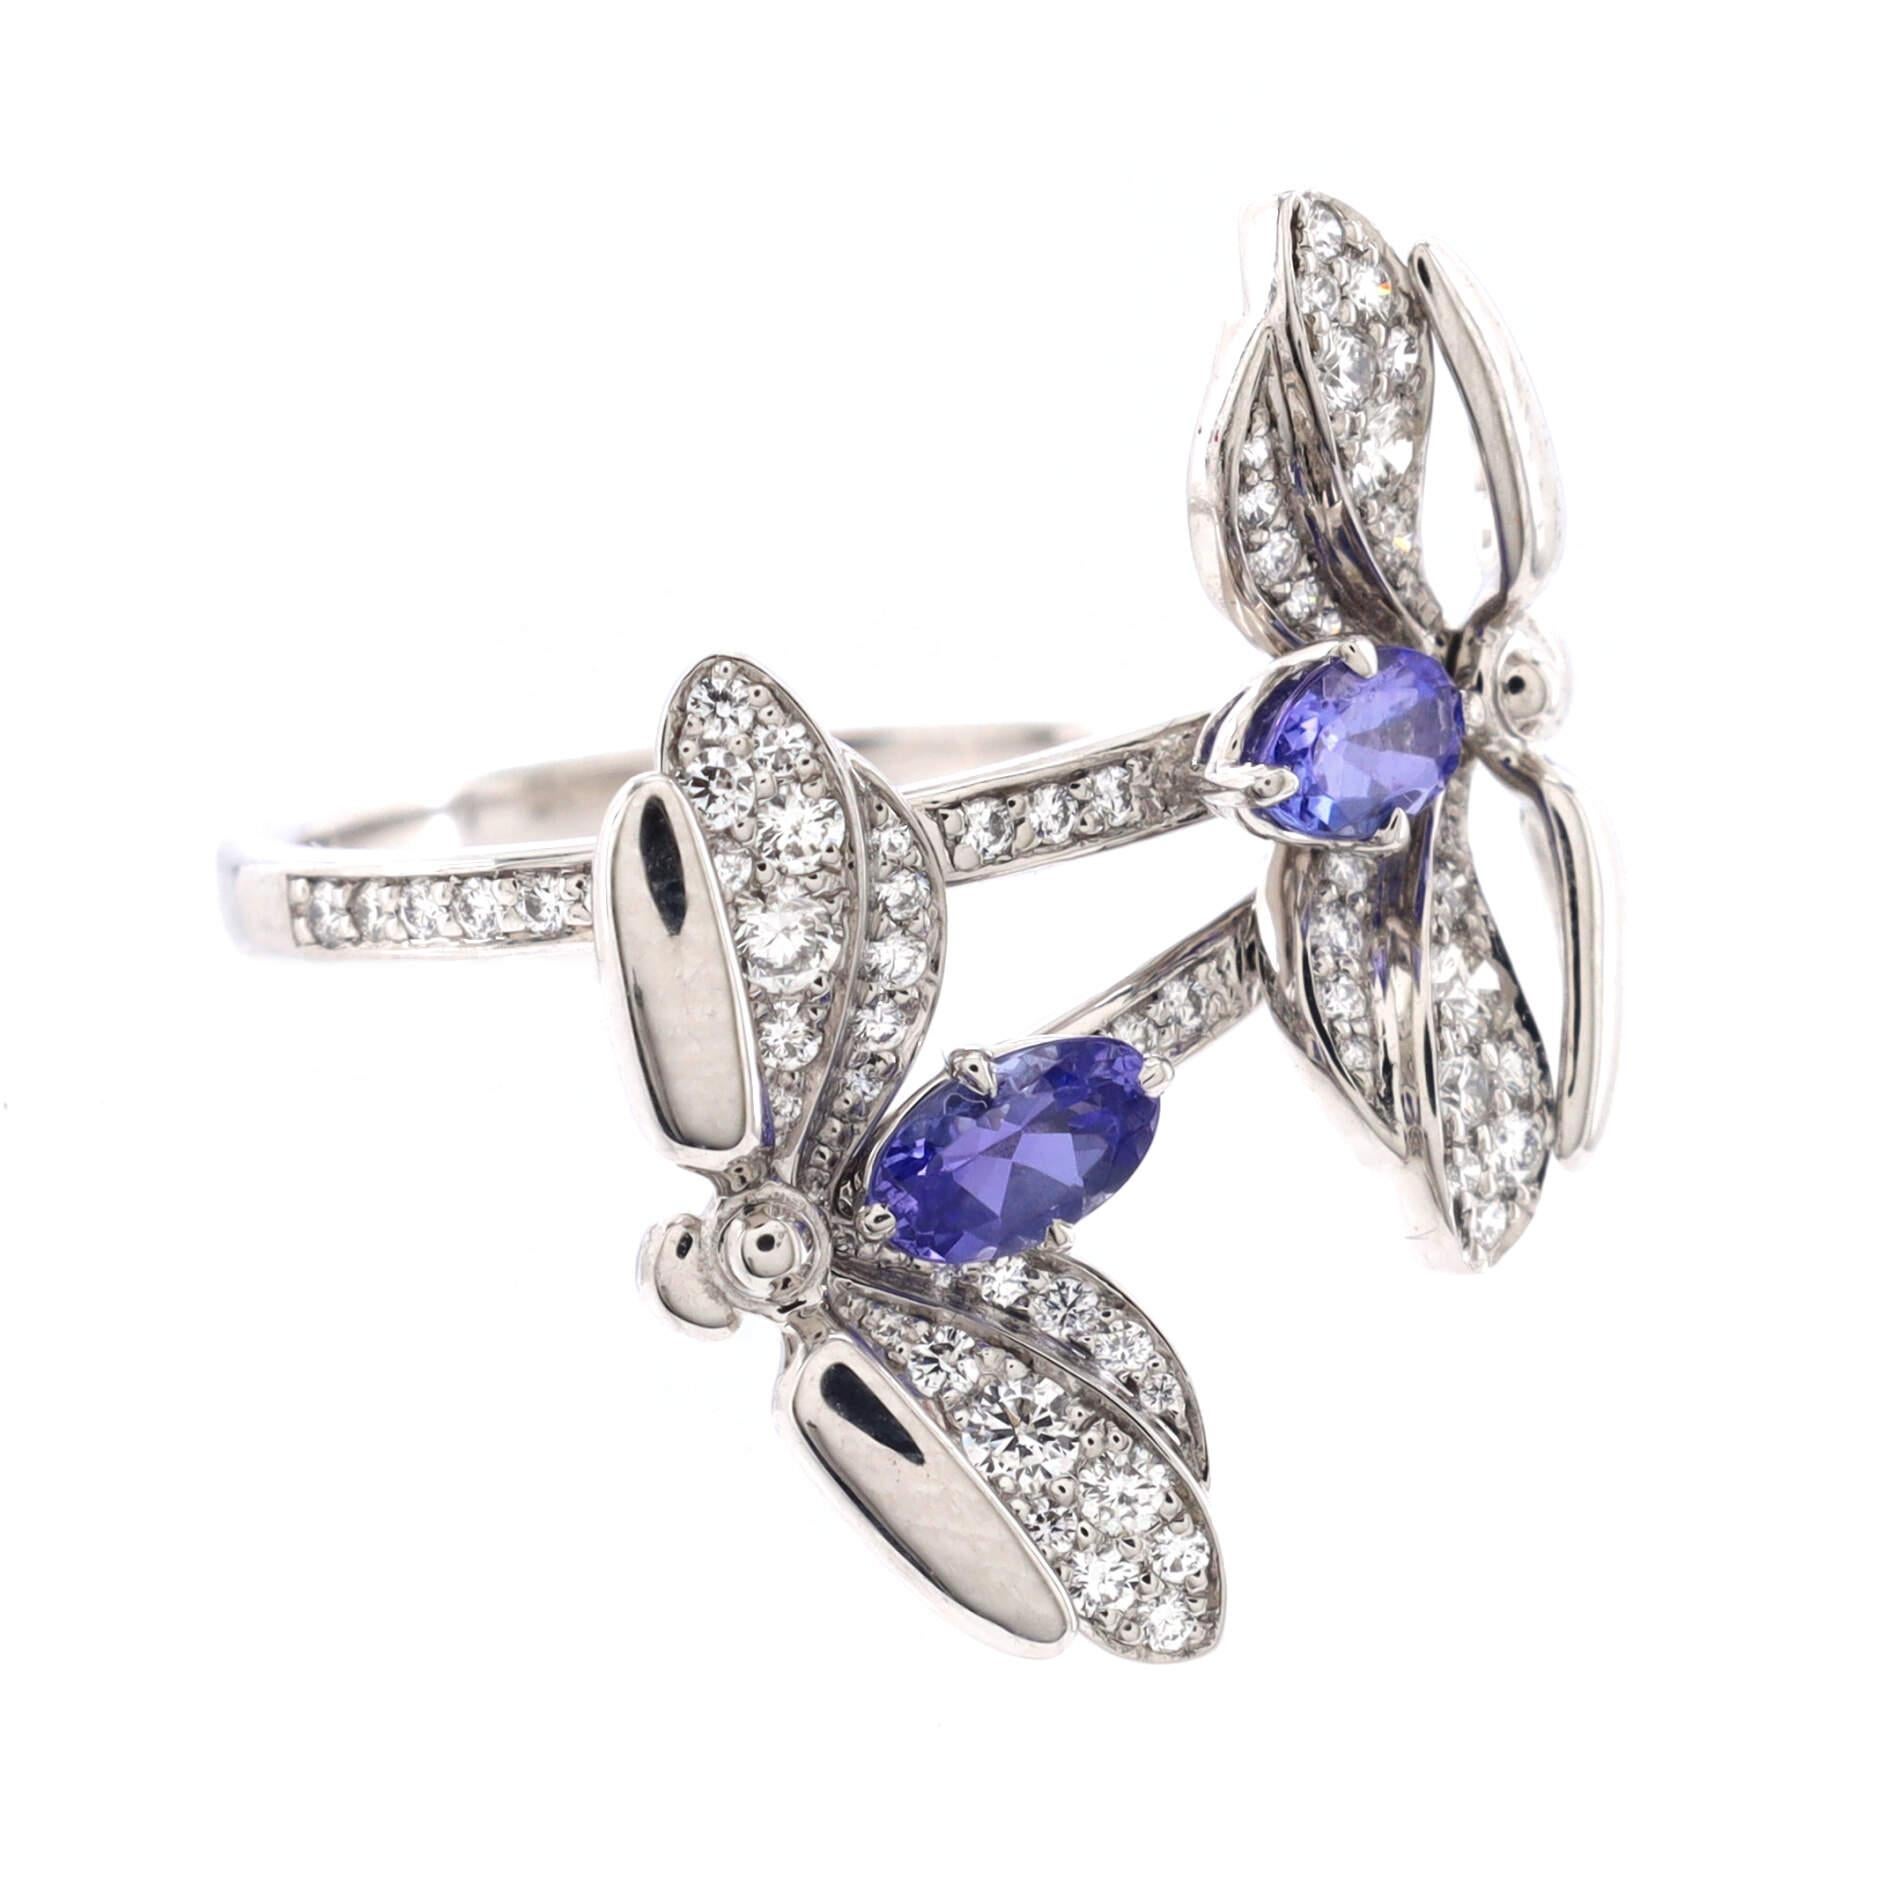 Condition: Great. Minor wear throughout.
Accessories: No Accessories
Measurements: Size: 6, Width: 1.90 mm
Designer: Tiffany & Co.
Model: Paper Flower Double Firefly Ring Platinum with Diamonds and Tanzanites
Exterior Color: Silver
Item Number: